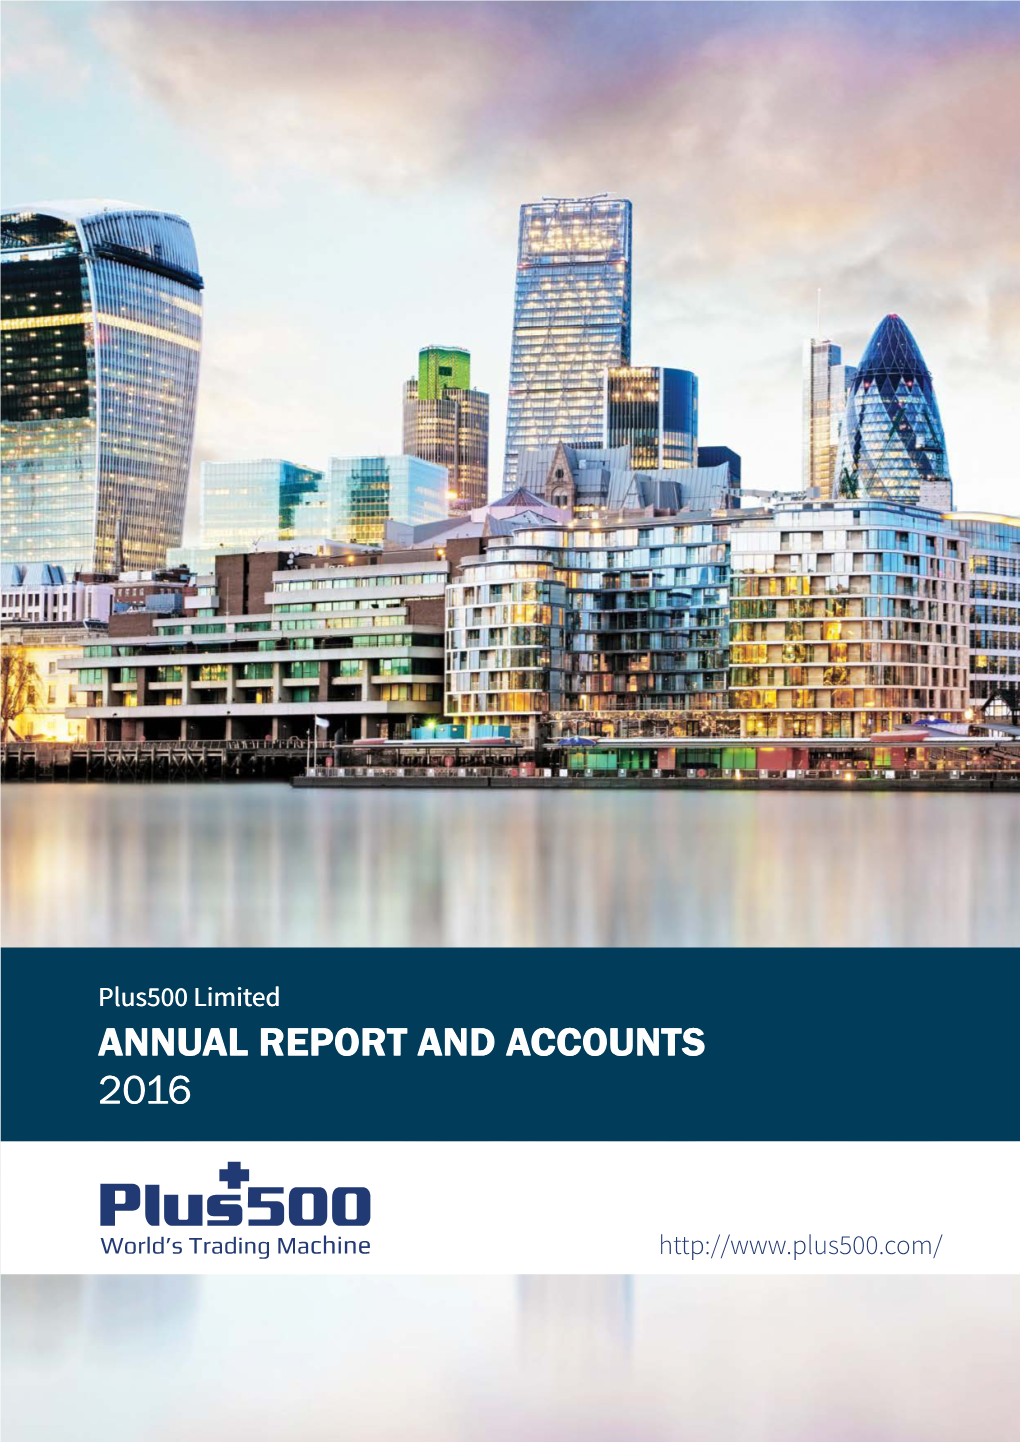 Annual Report and Accounts 2016